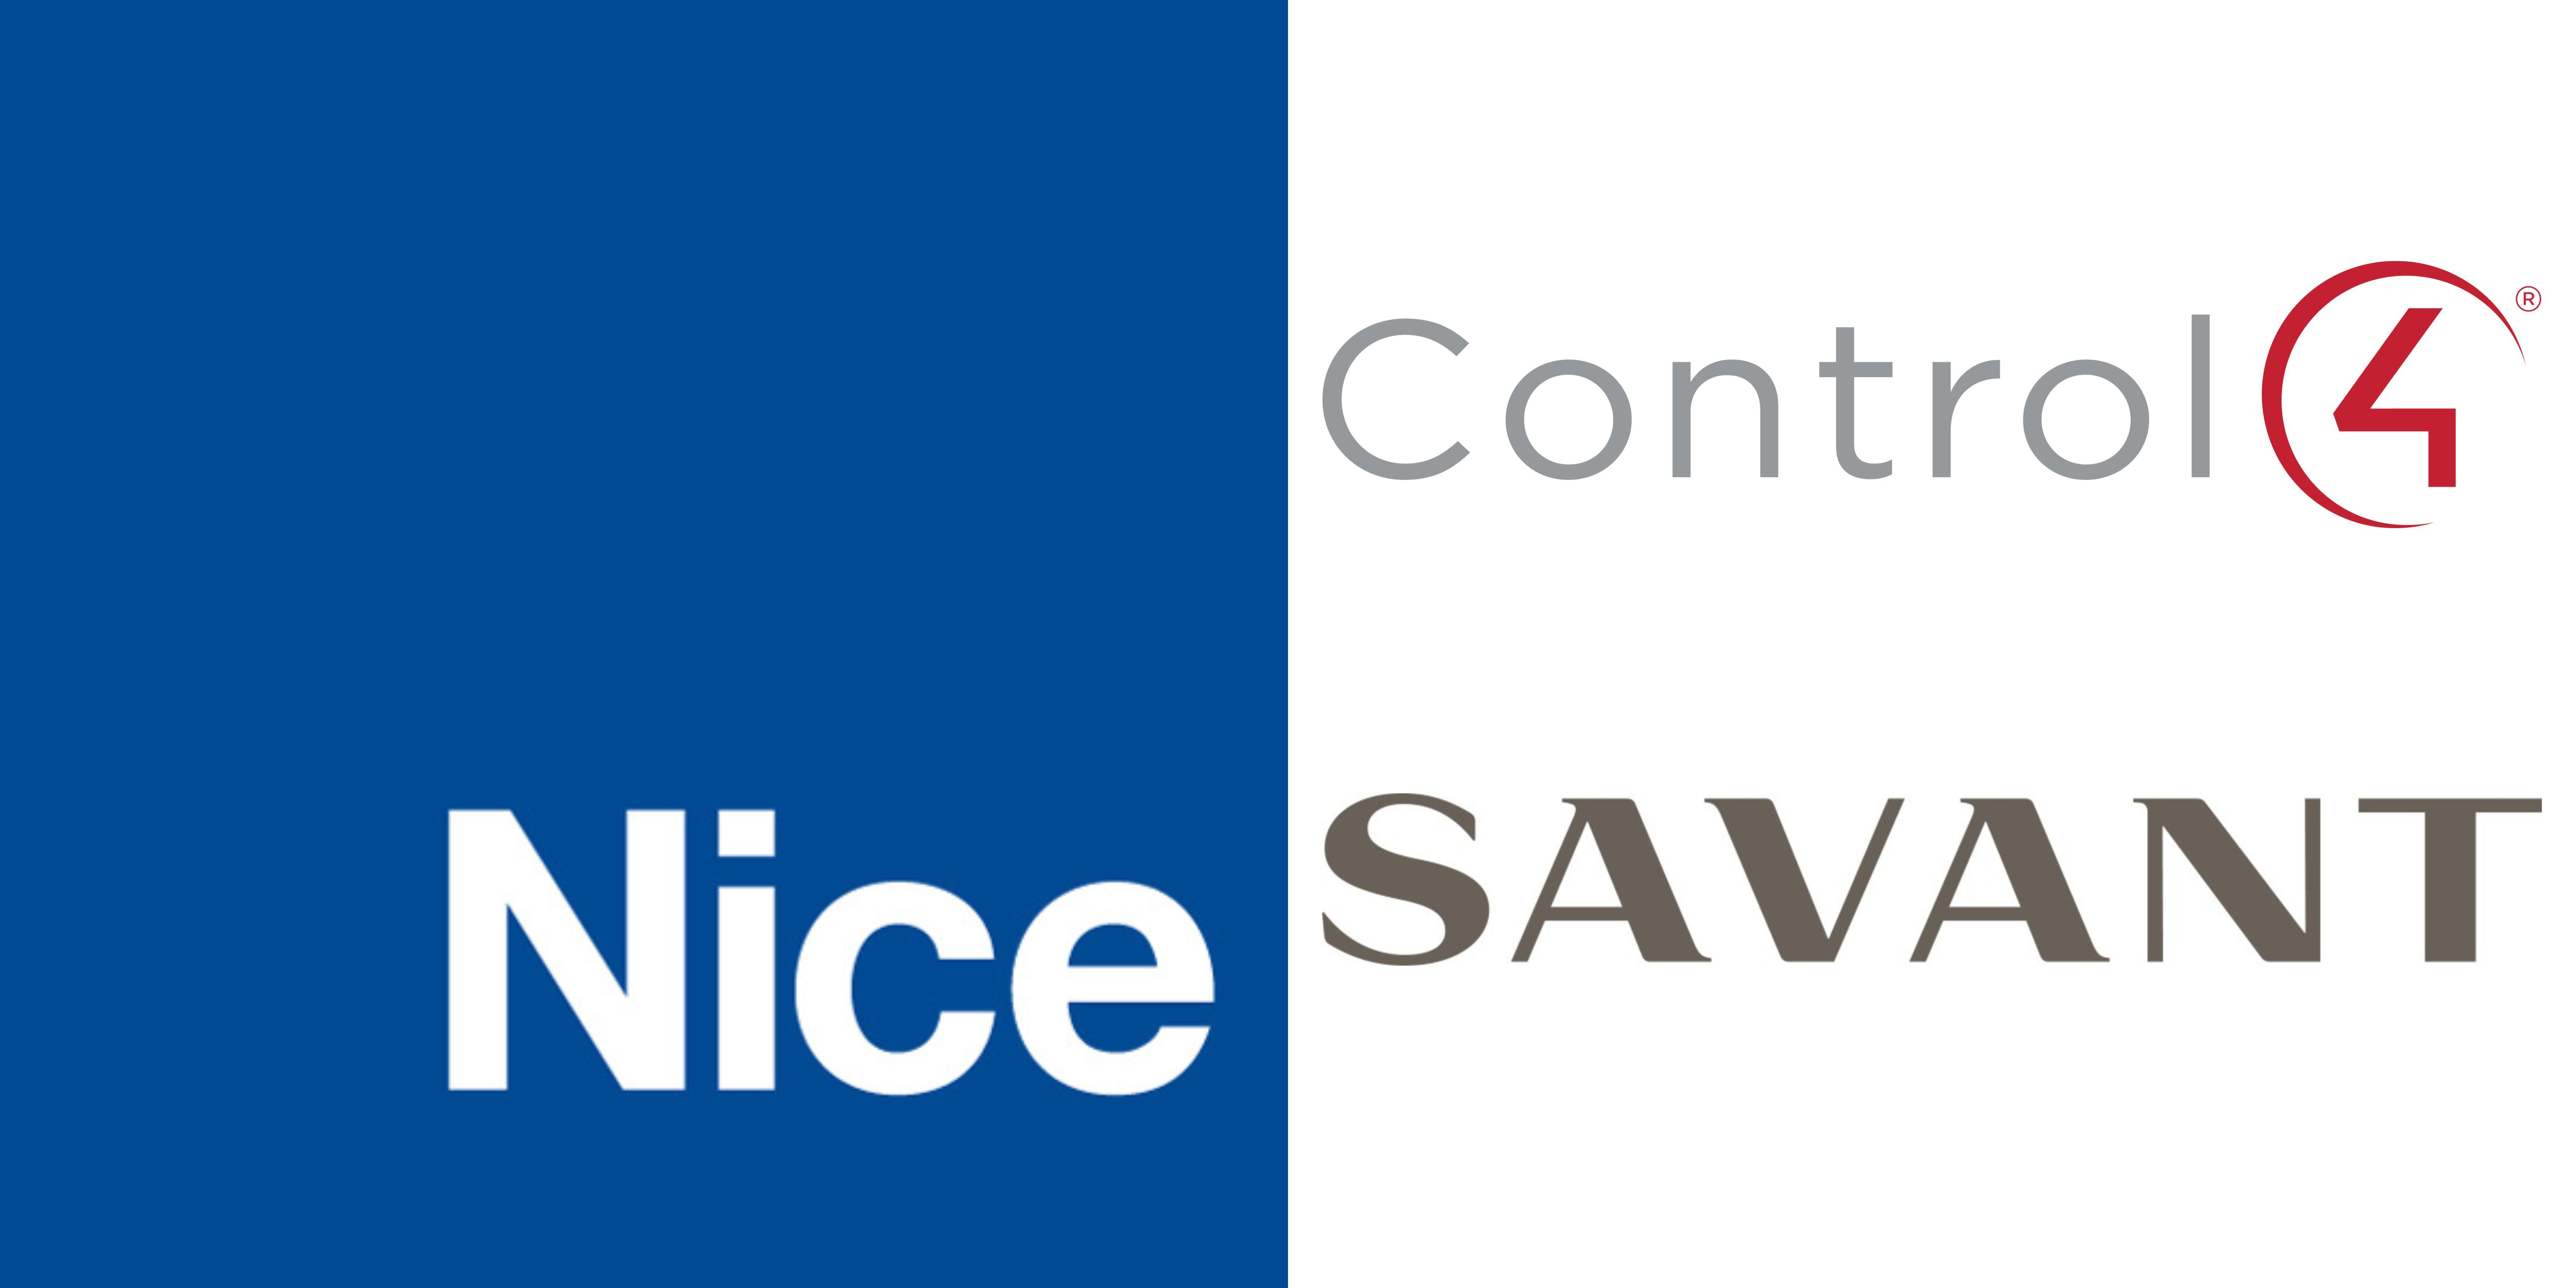 Get Wired Tec is a proud dealer for Nice, Control4, and Savant control systems.